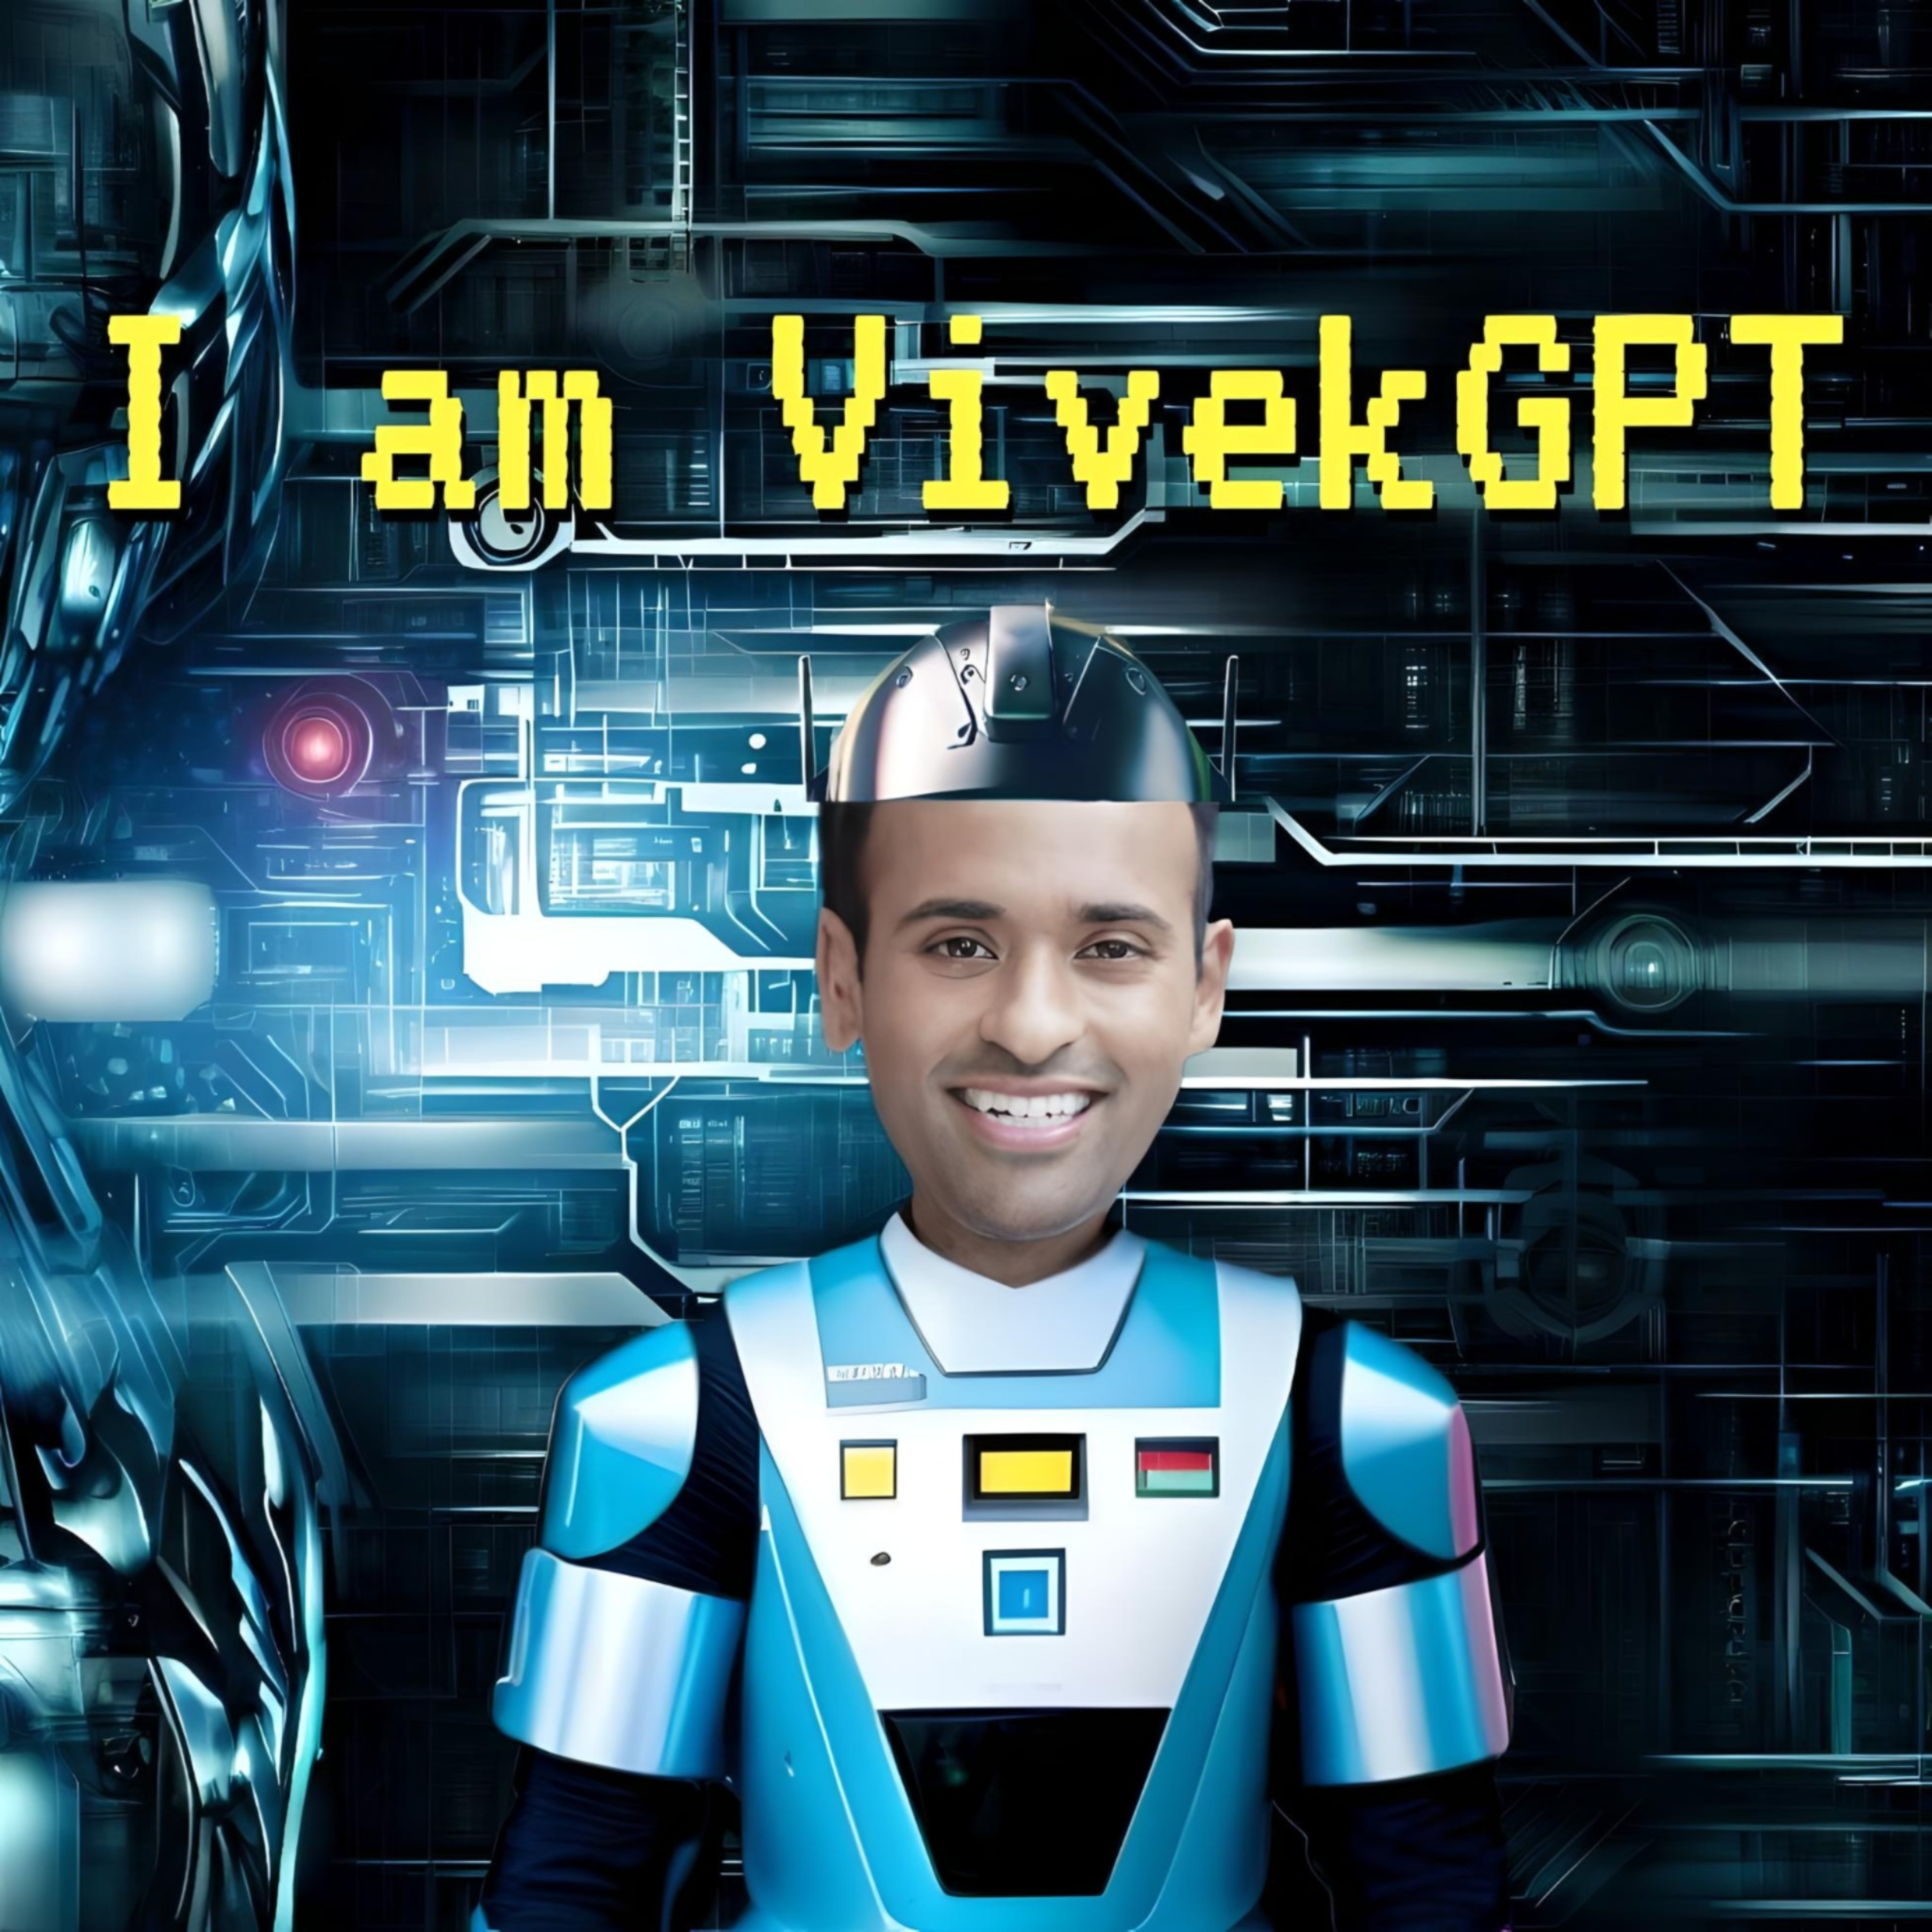 Vivek Ramaswamy as an android with text reading "I am VivekGPT".